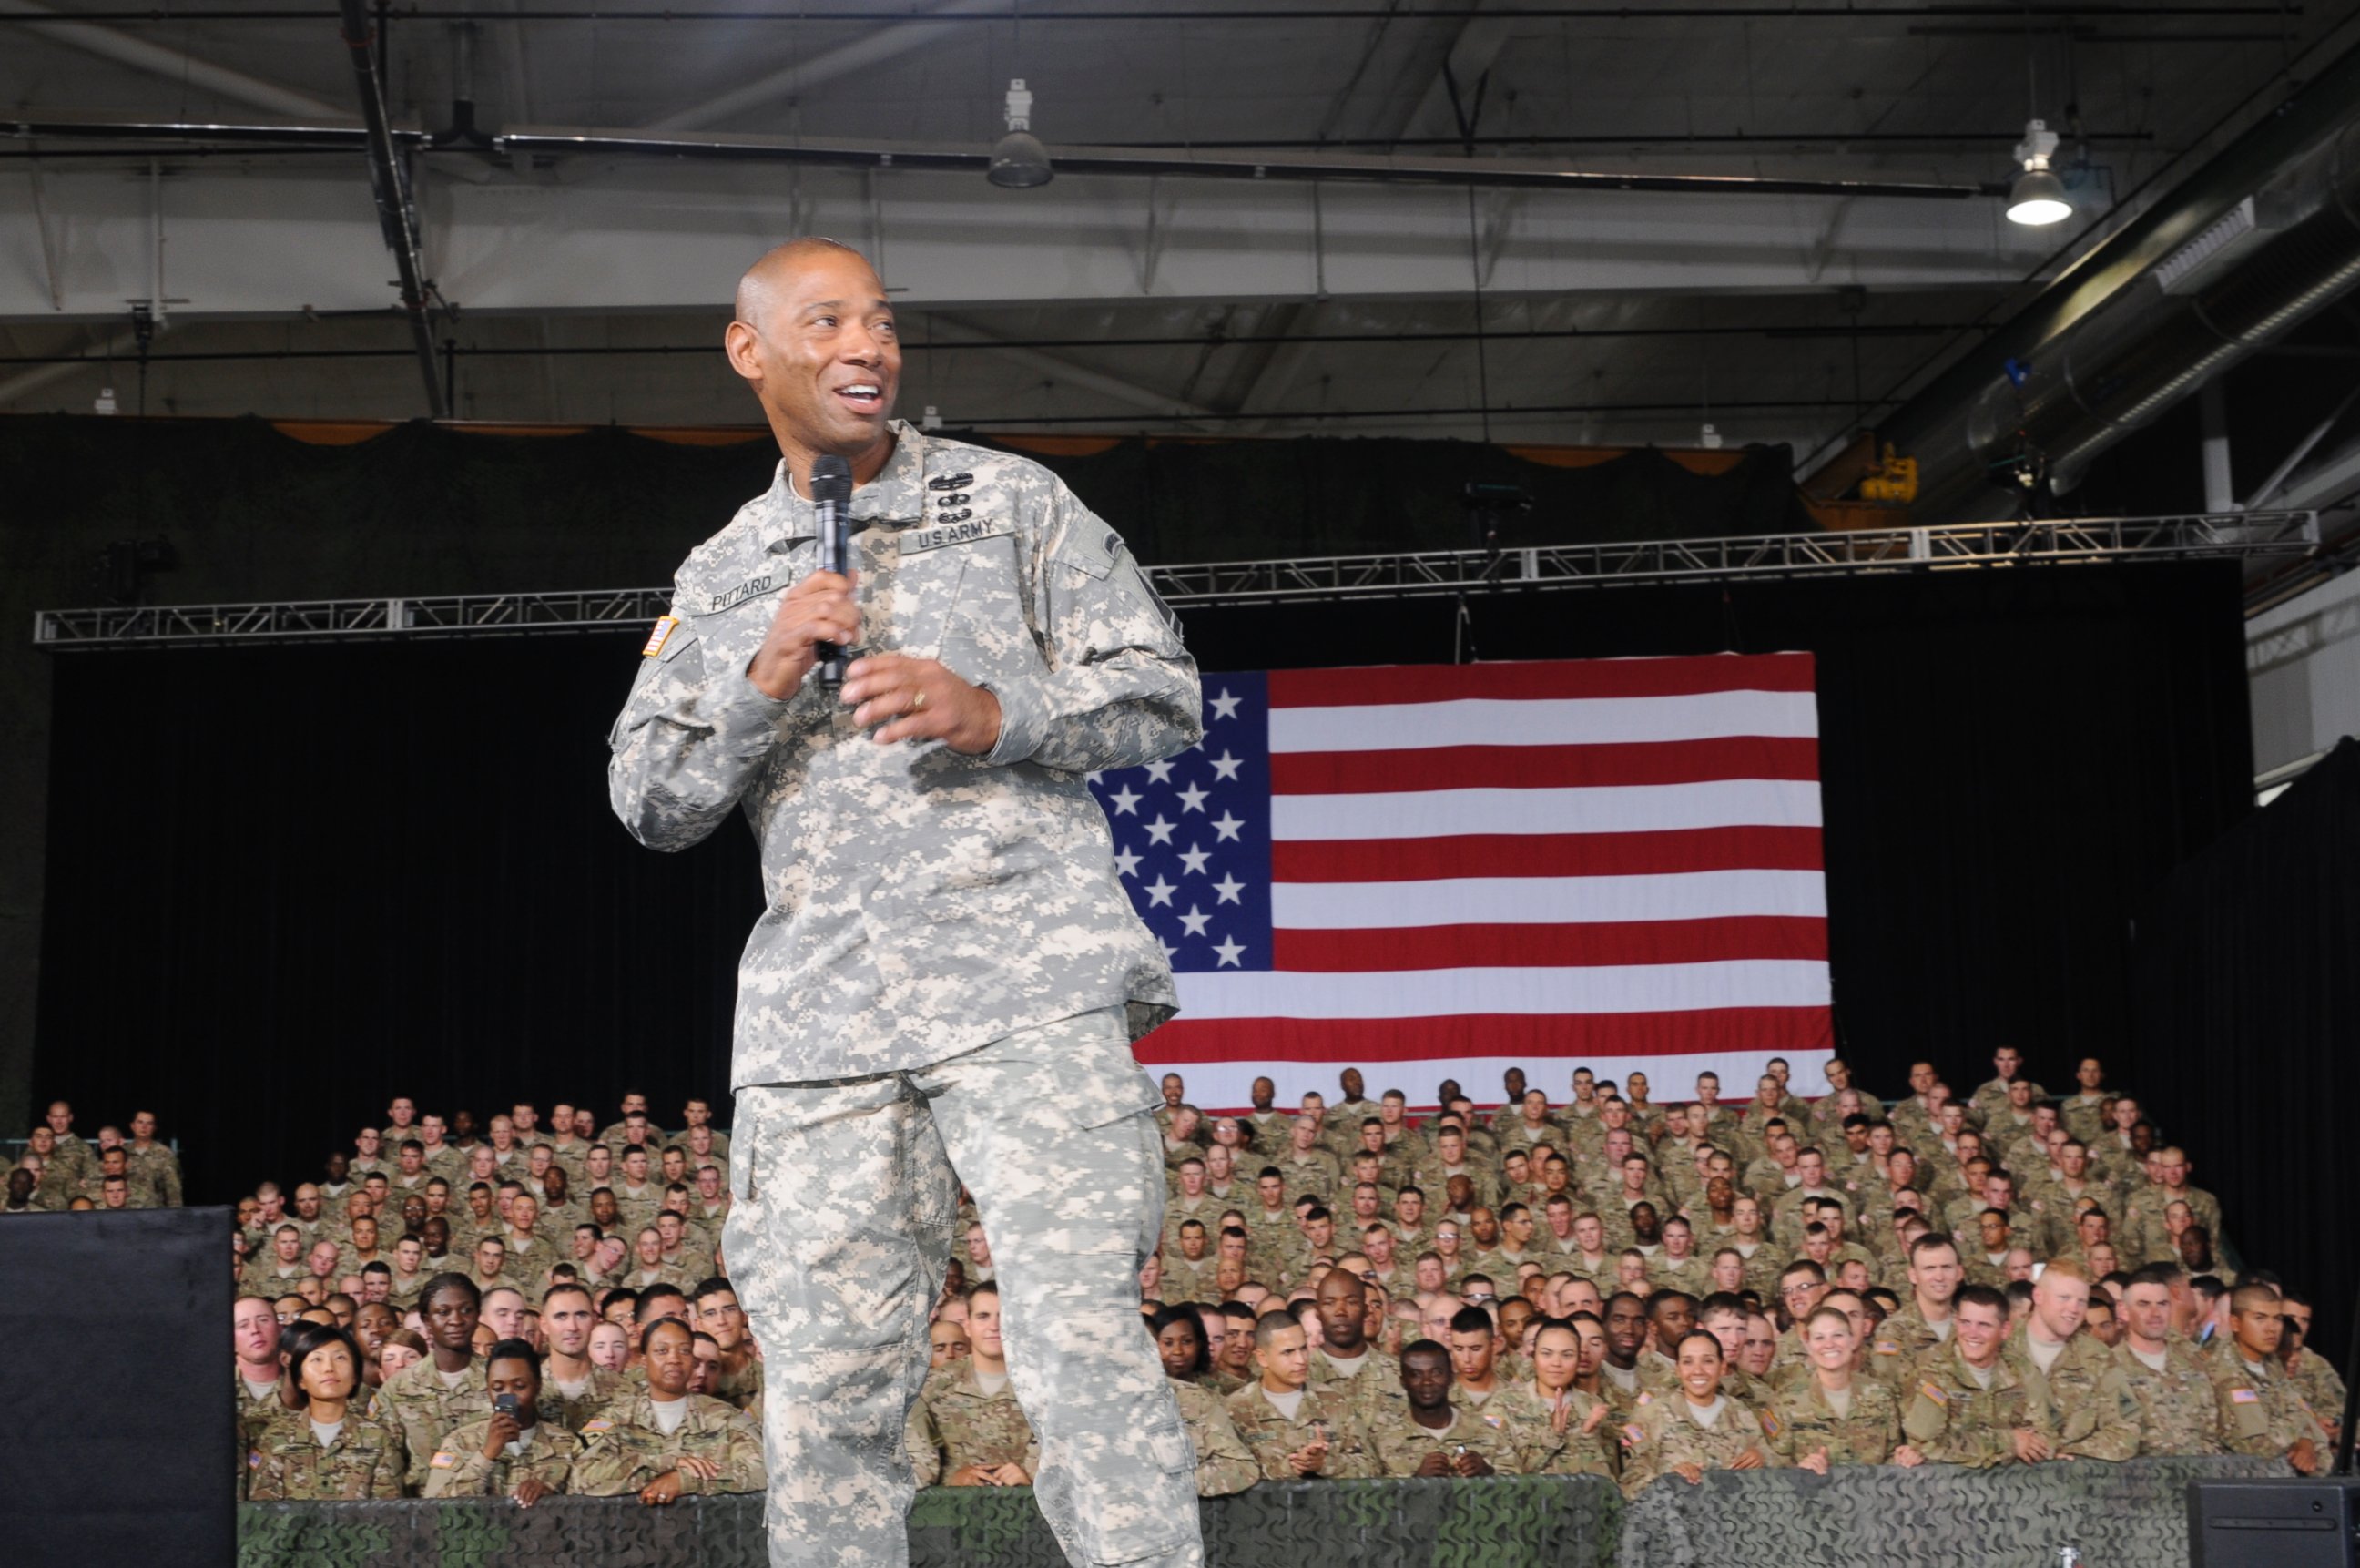 PHOTO: Army Major General Dana Pittard speaks during an event at Fort Bliss, Texas, Aug. 31, 2012.